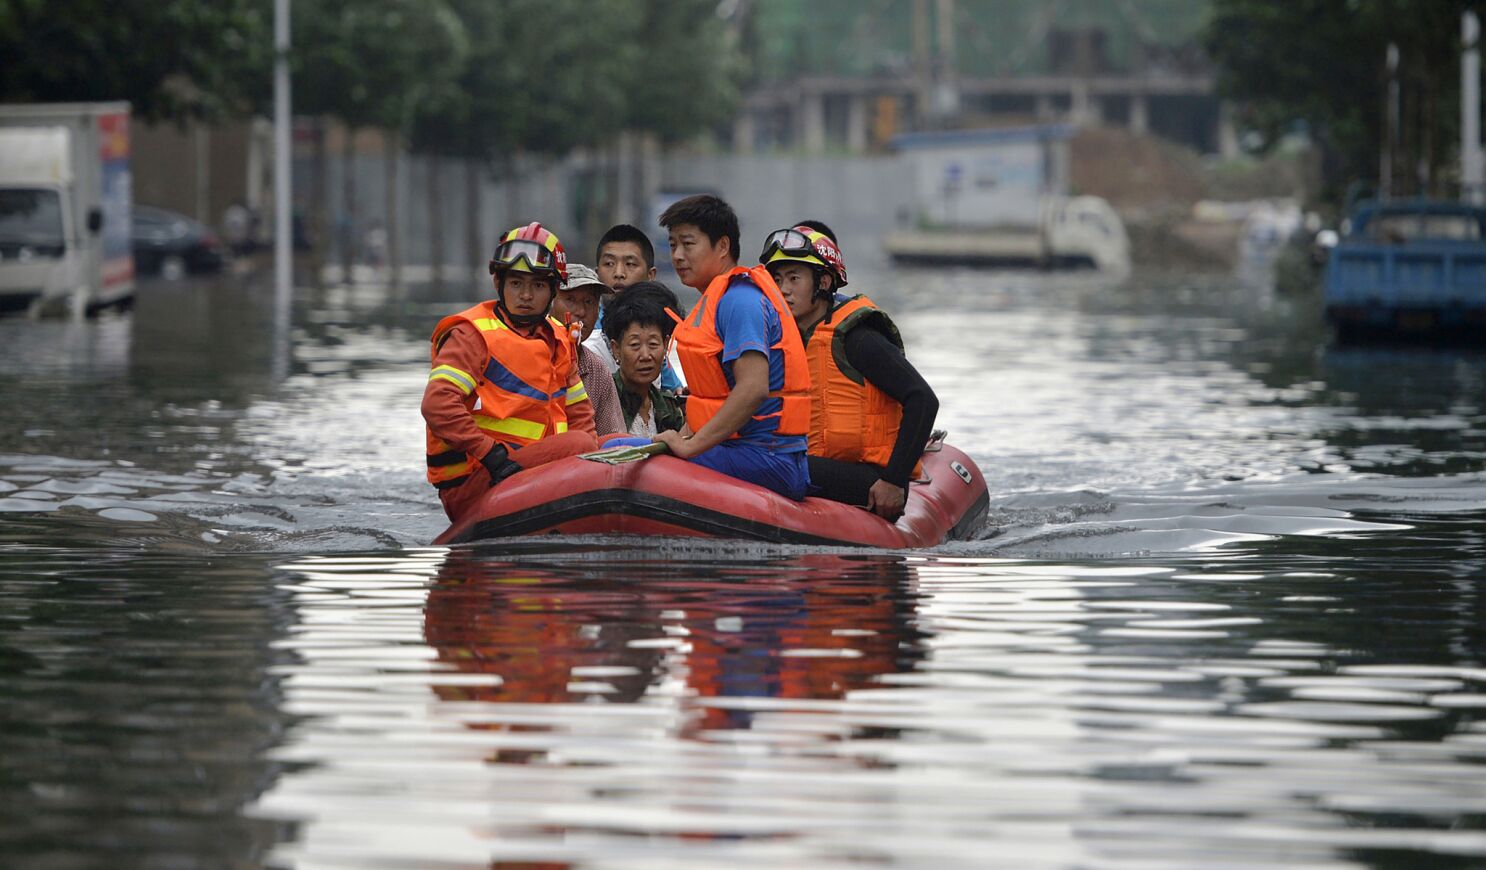 More than 170 dead in China flooding; many still missing - Los Angeles Times